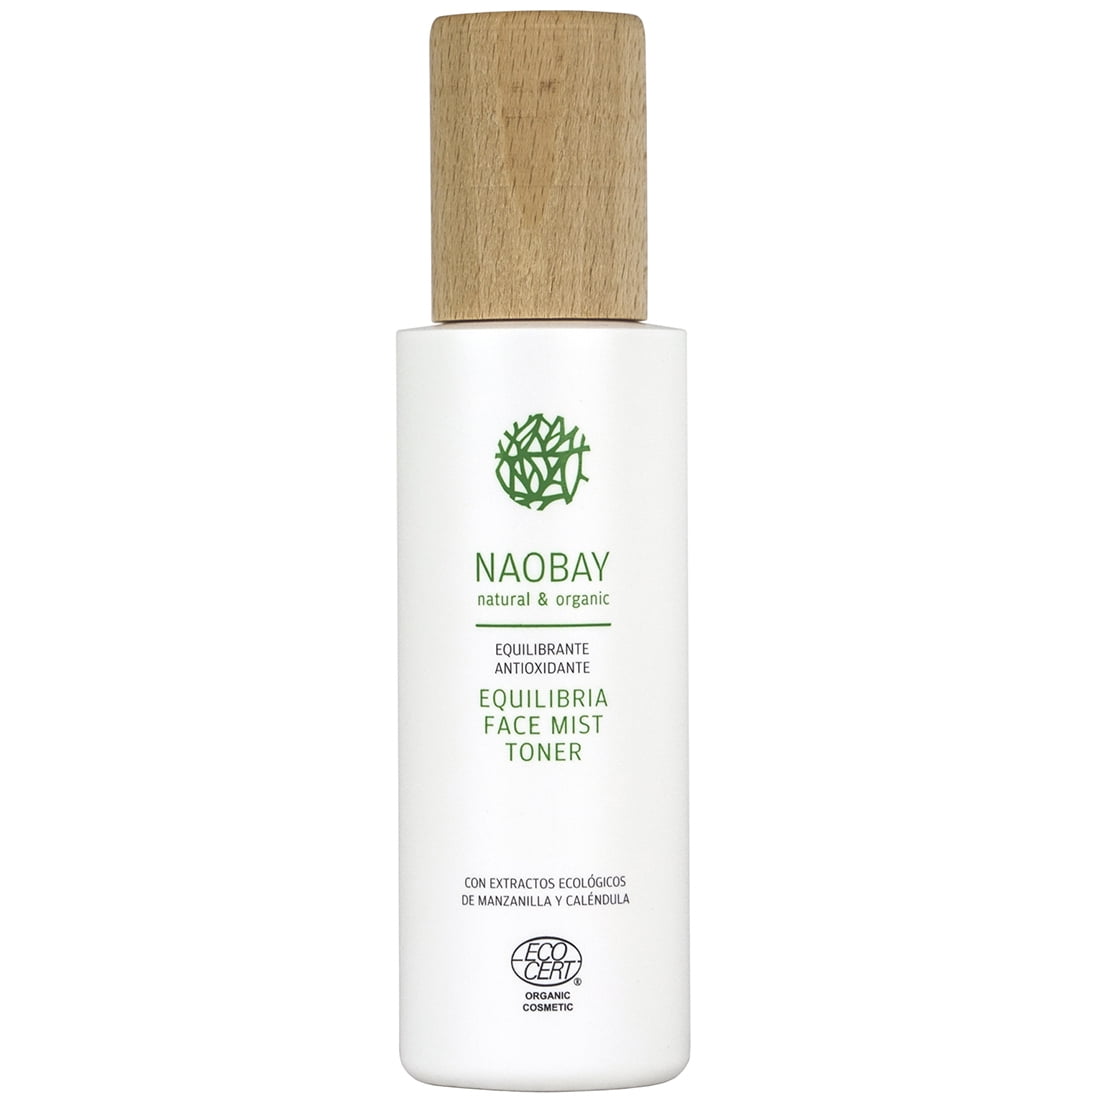 NAOBAY's Equilibria Face Mist Toner Fortified With Açaí, Cinnamon, Vera Extracts - Walmart.com